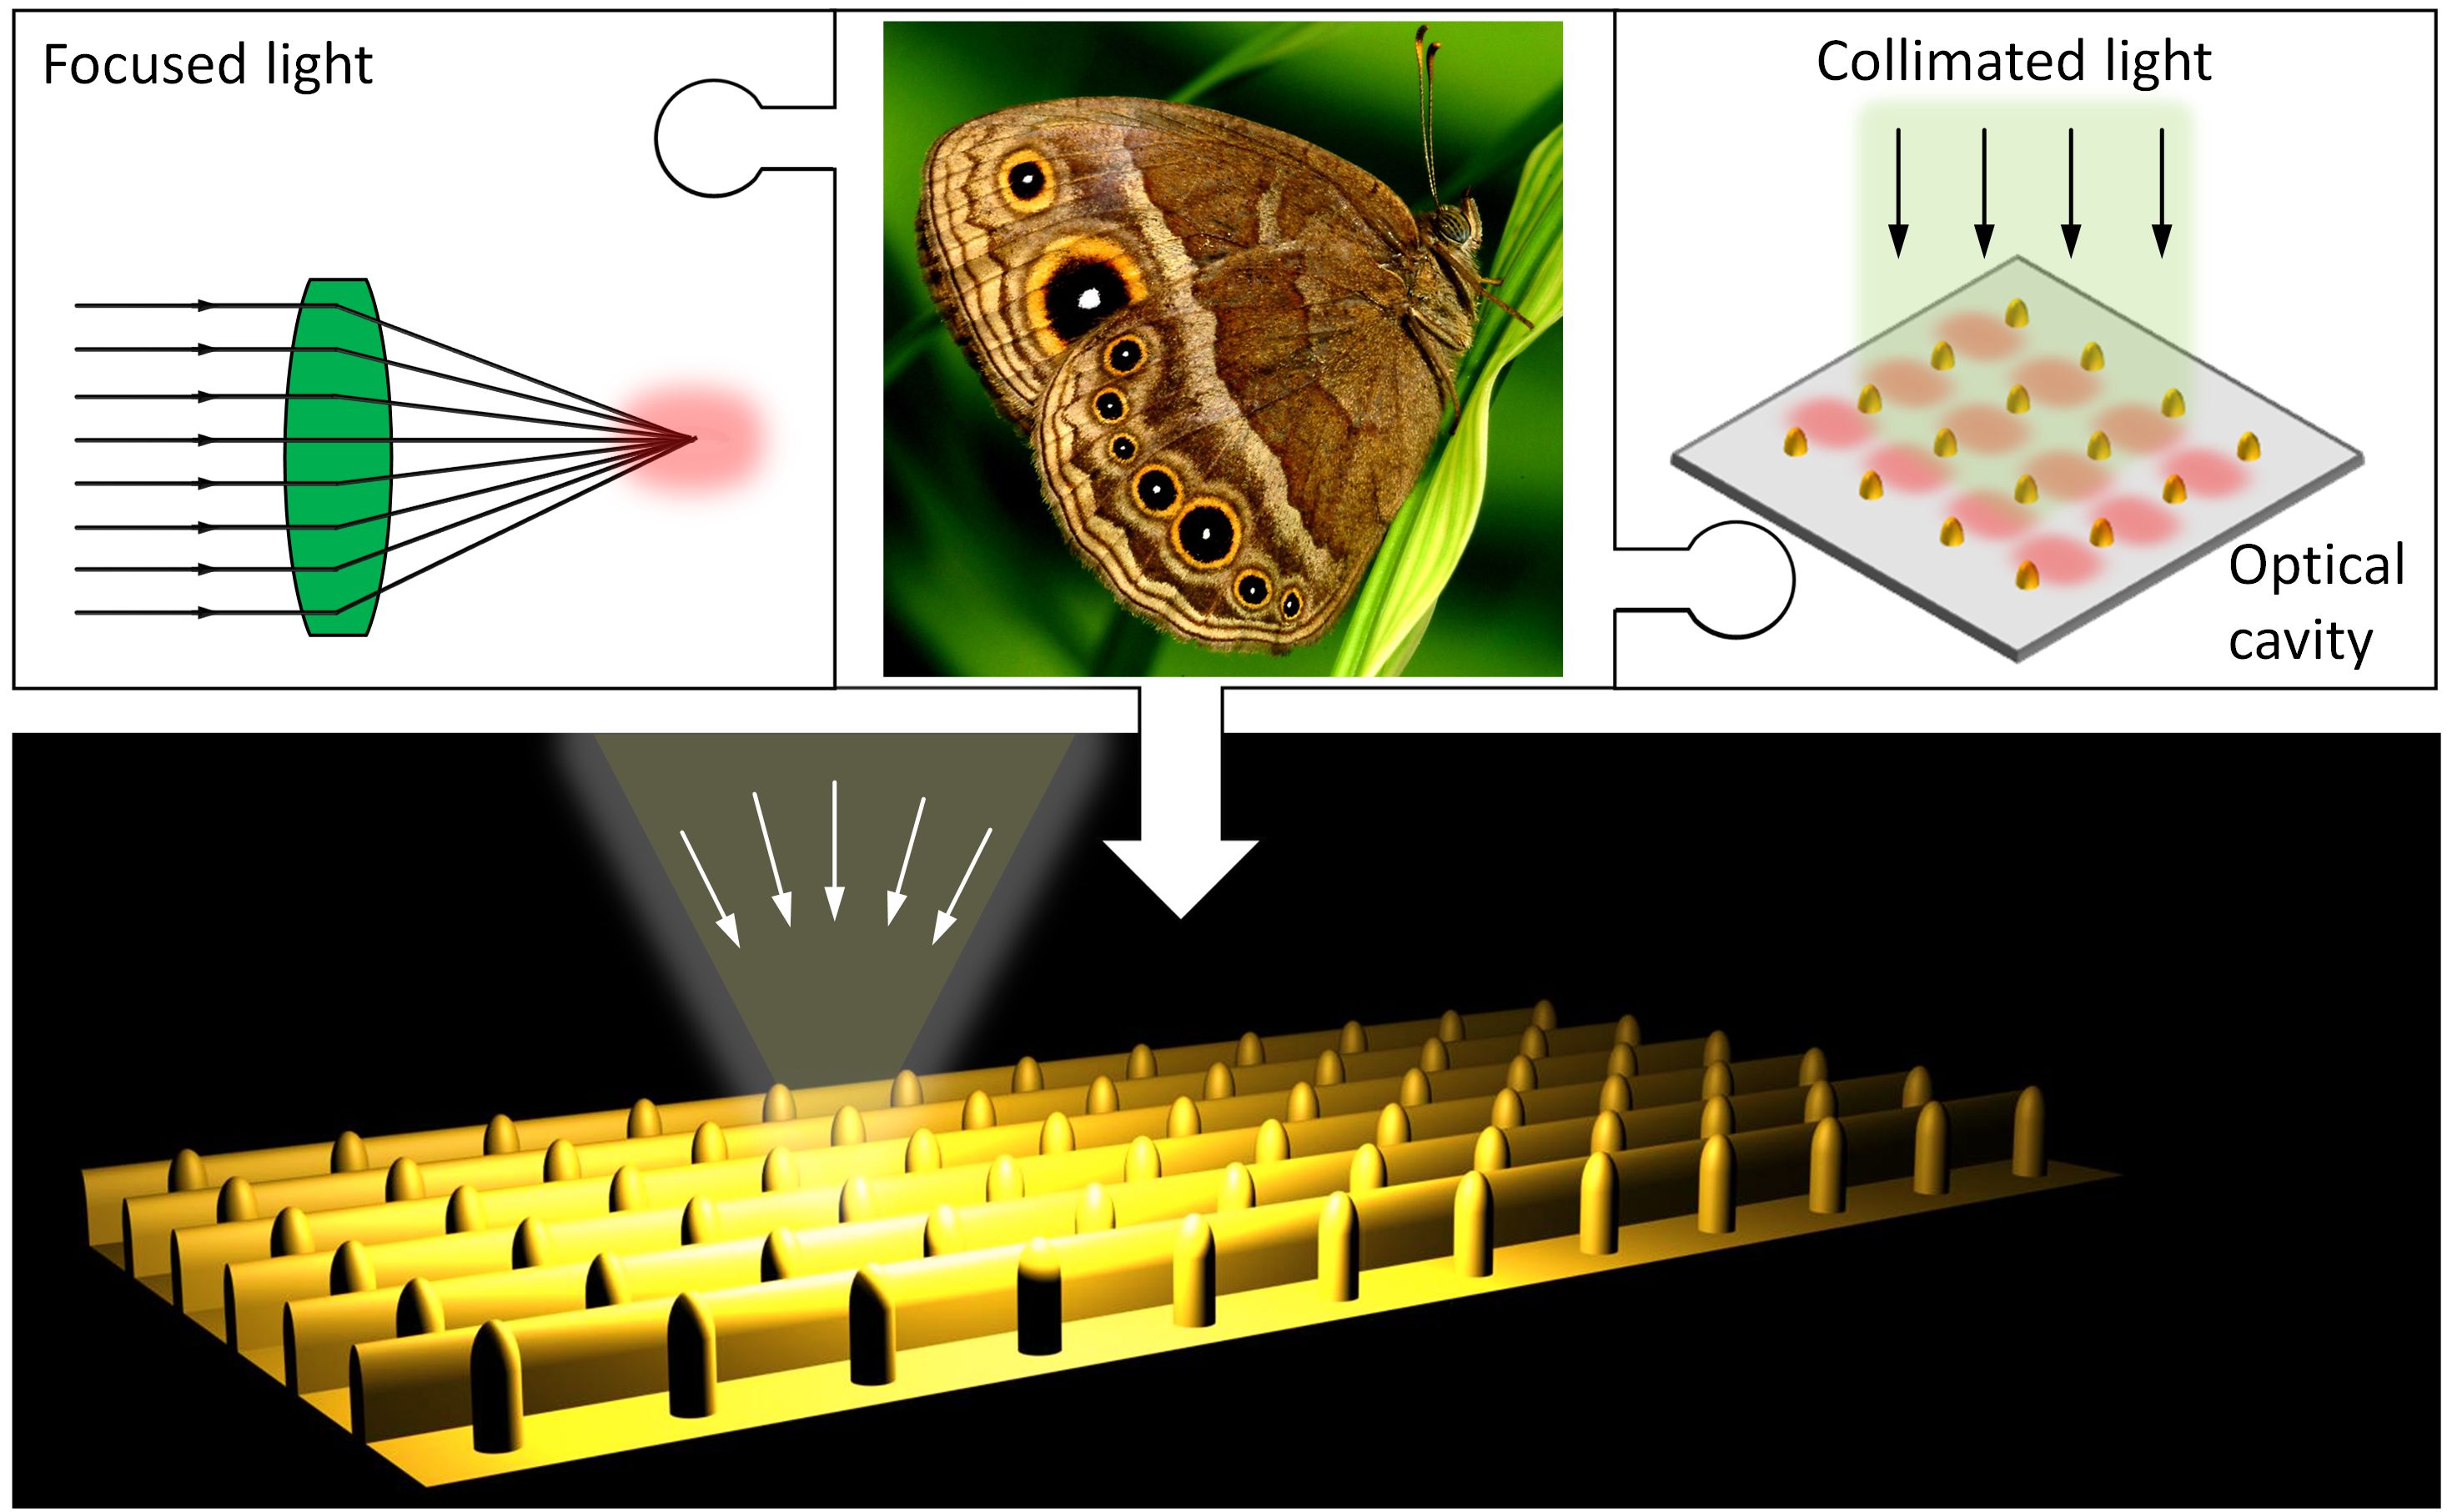 Focused light combined with collimated light and an optical cavity, inspired by butterfly wings, created nanostructures that allowed more light to be concentrated